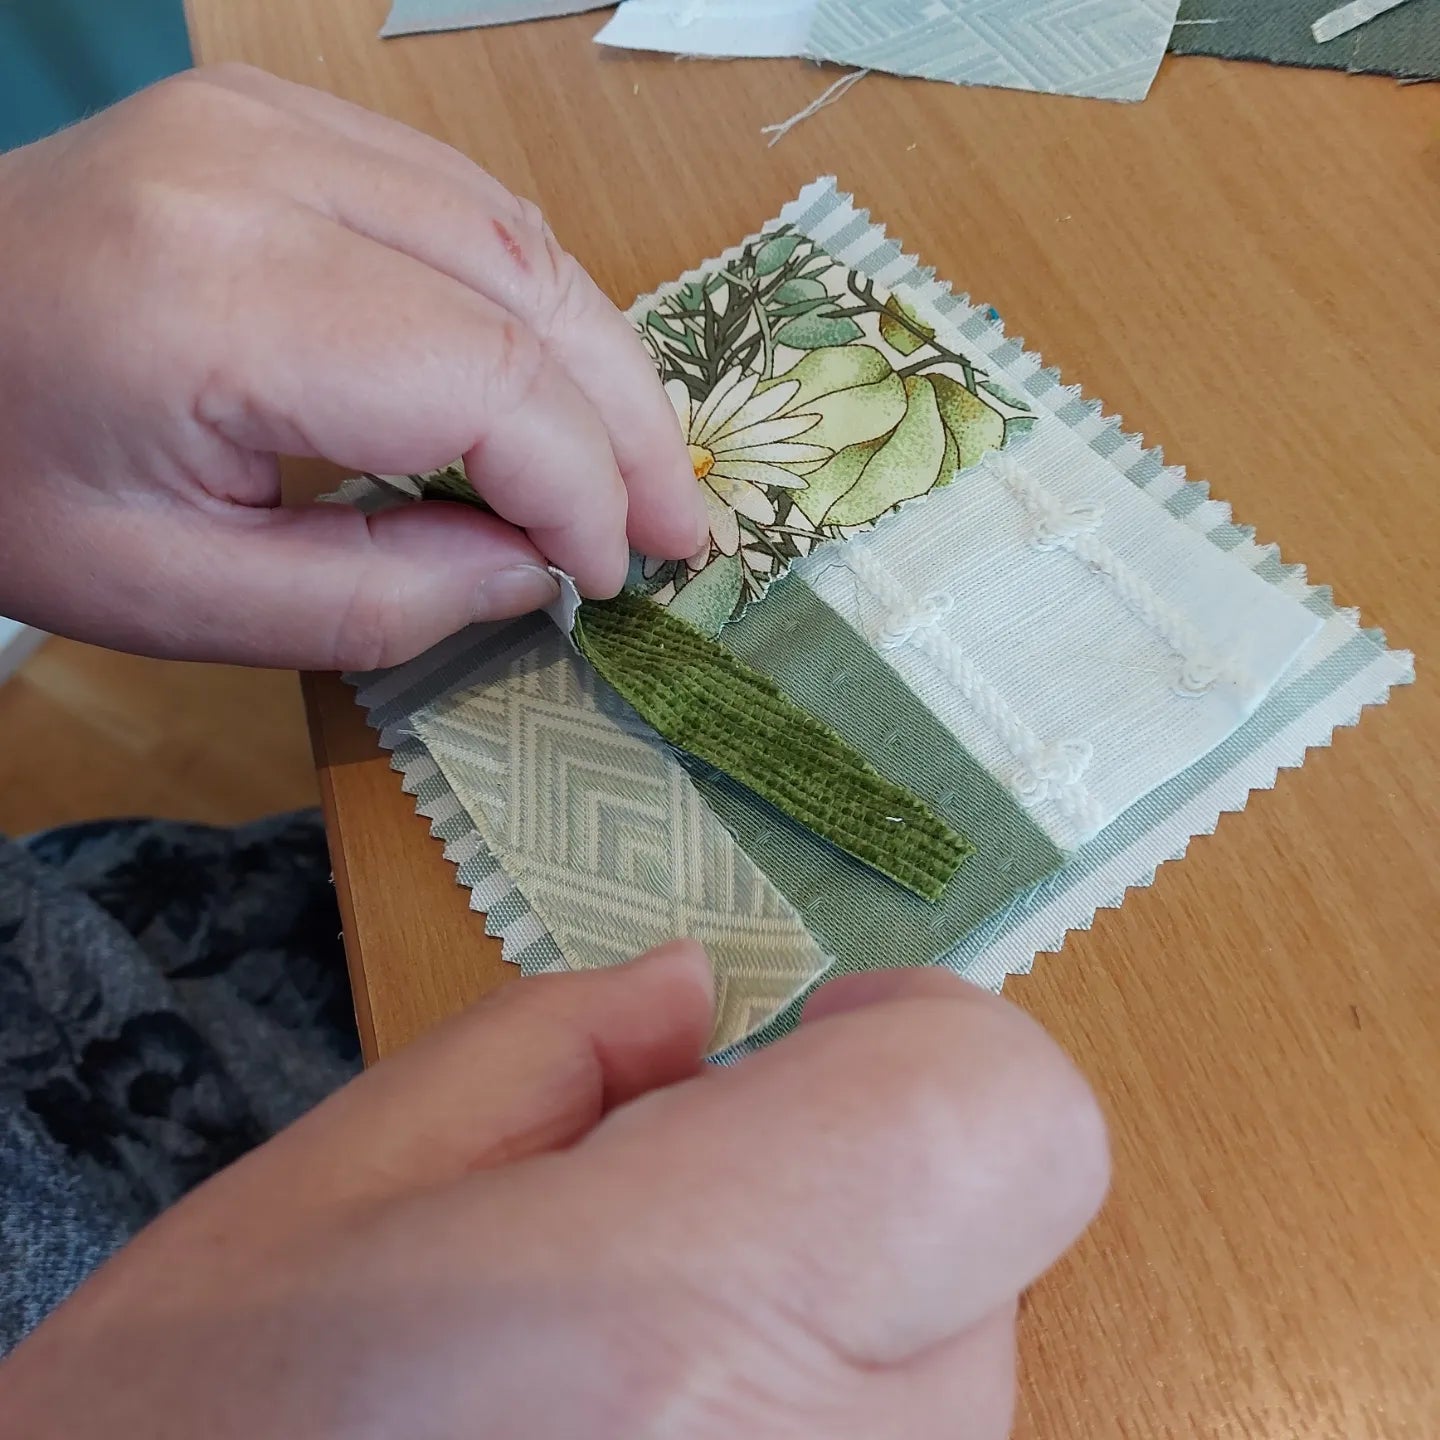 Mindful Scrapcrafting at Kingshill House (5/6 week course) [CURRENTLY FULL]